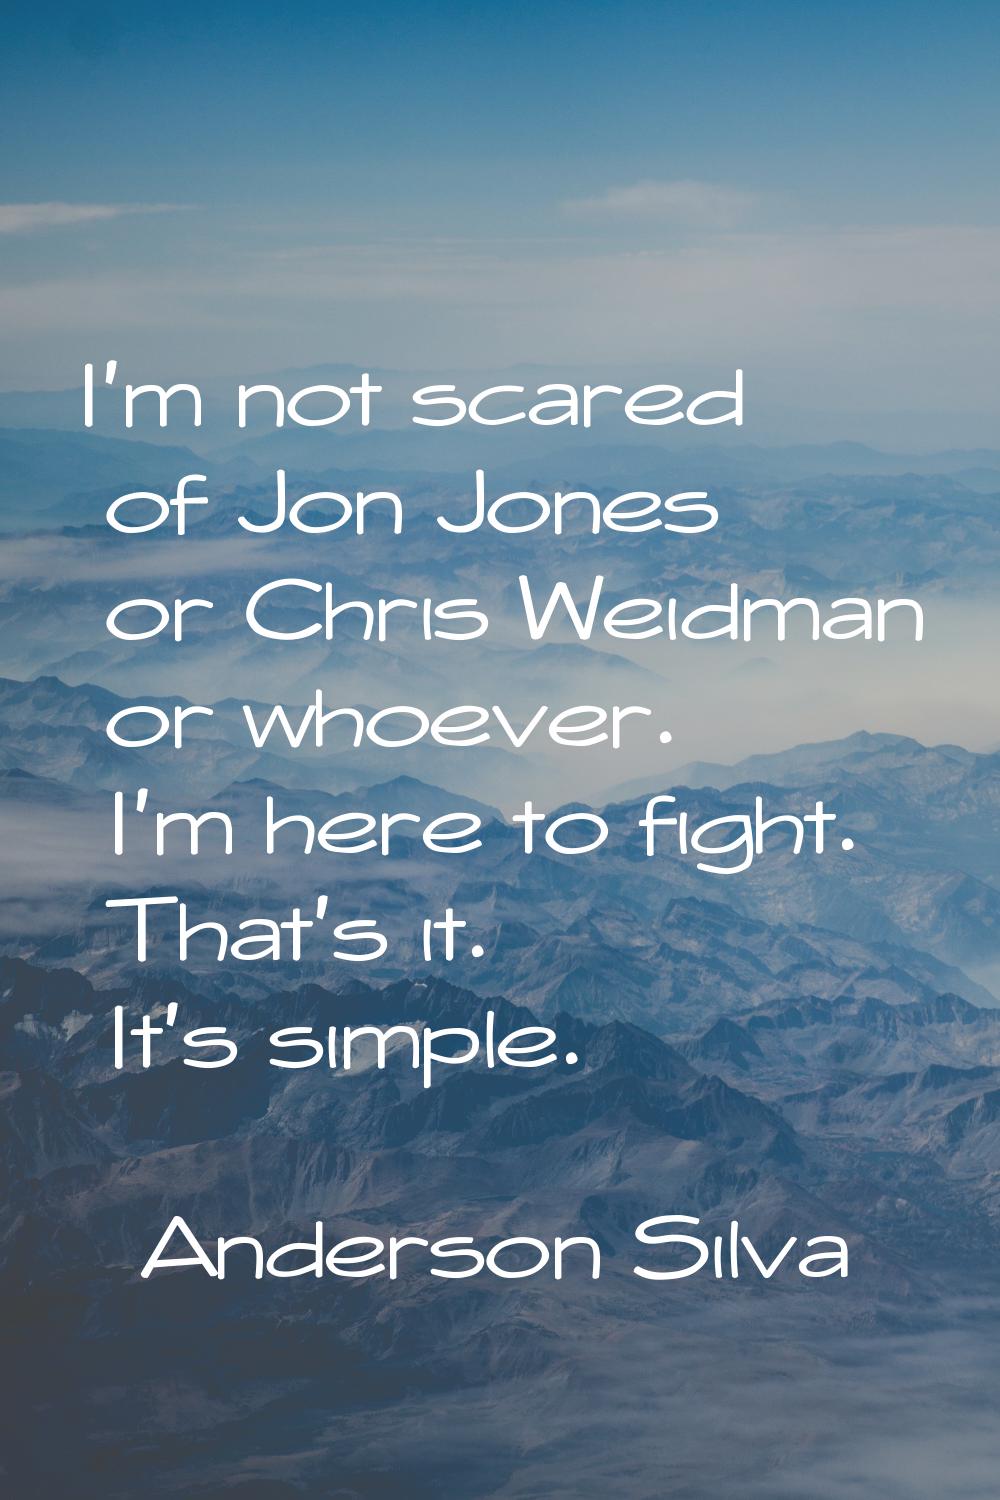 I'm not scared of Jon Jones or Chris Weidman or whoever. I'm here to fight. That's it. It's simple.